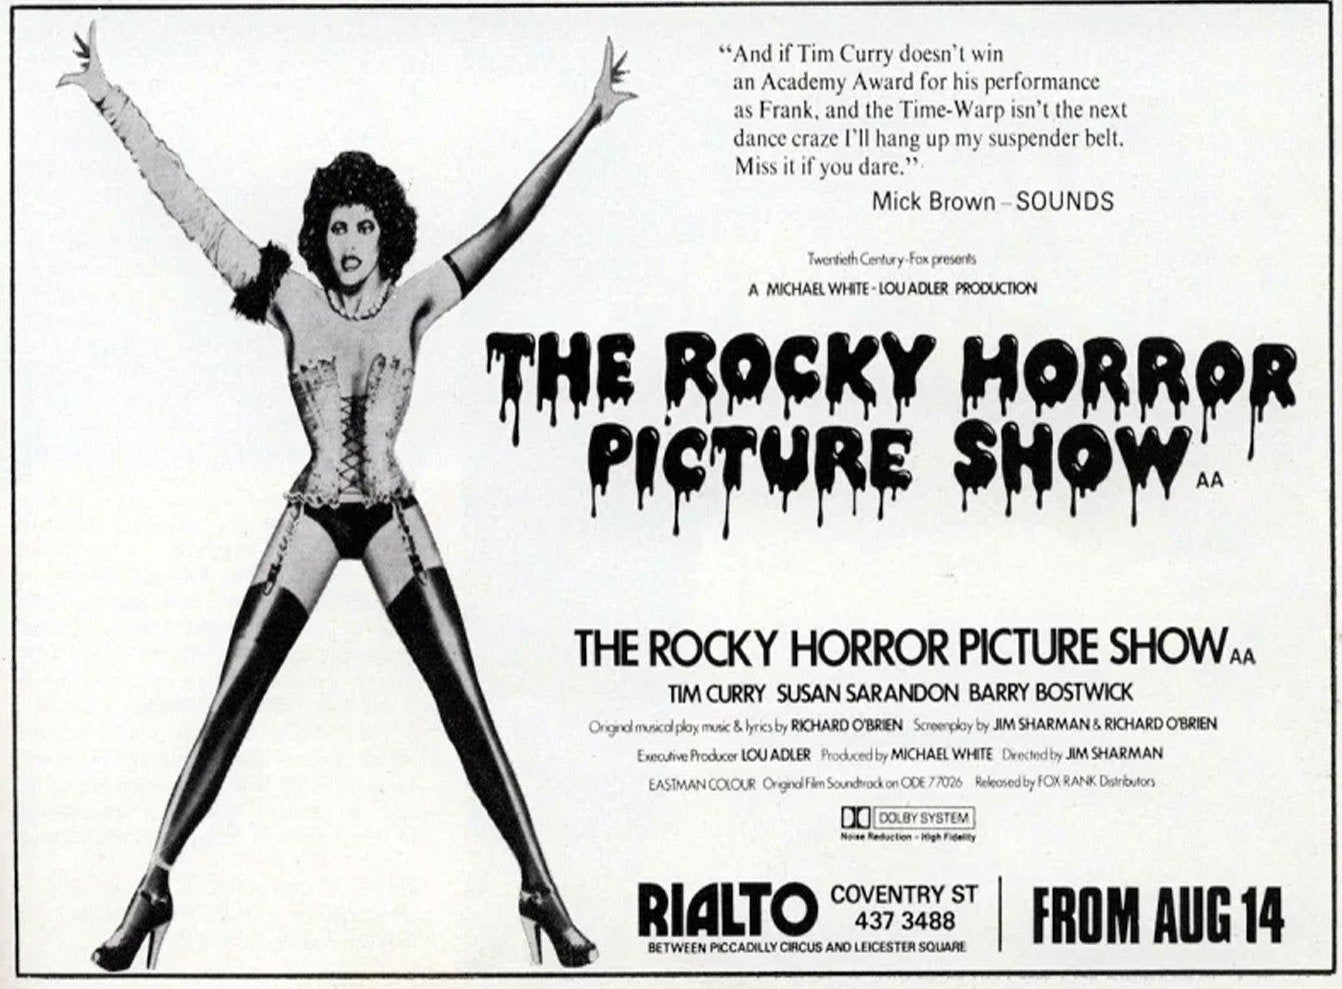 The original movie poster of The Rocky Horror Picture show when it first premiered at the Rialto Cinema in London